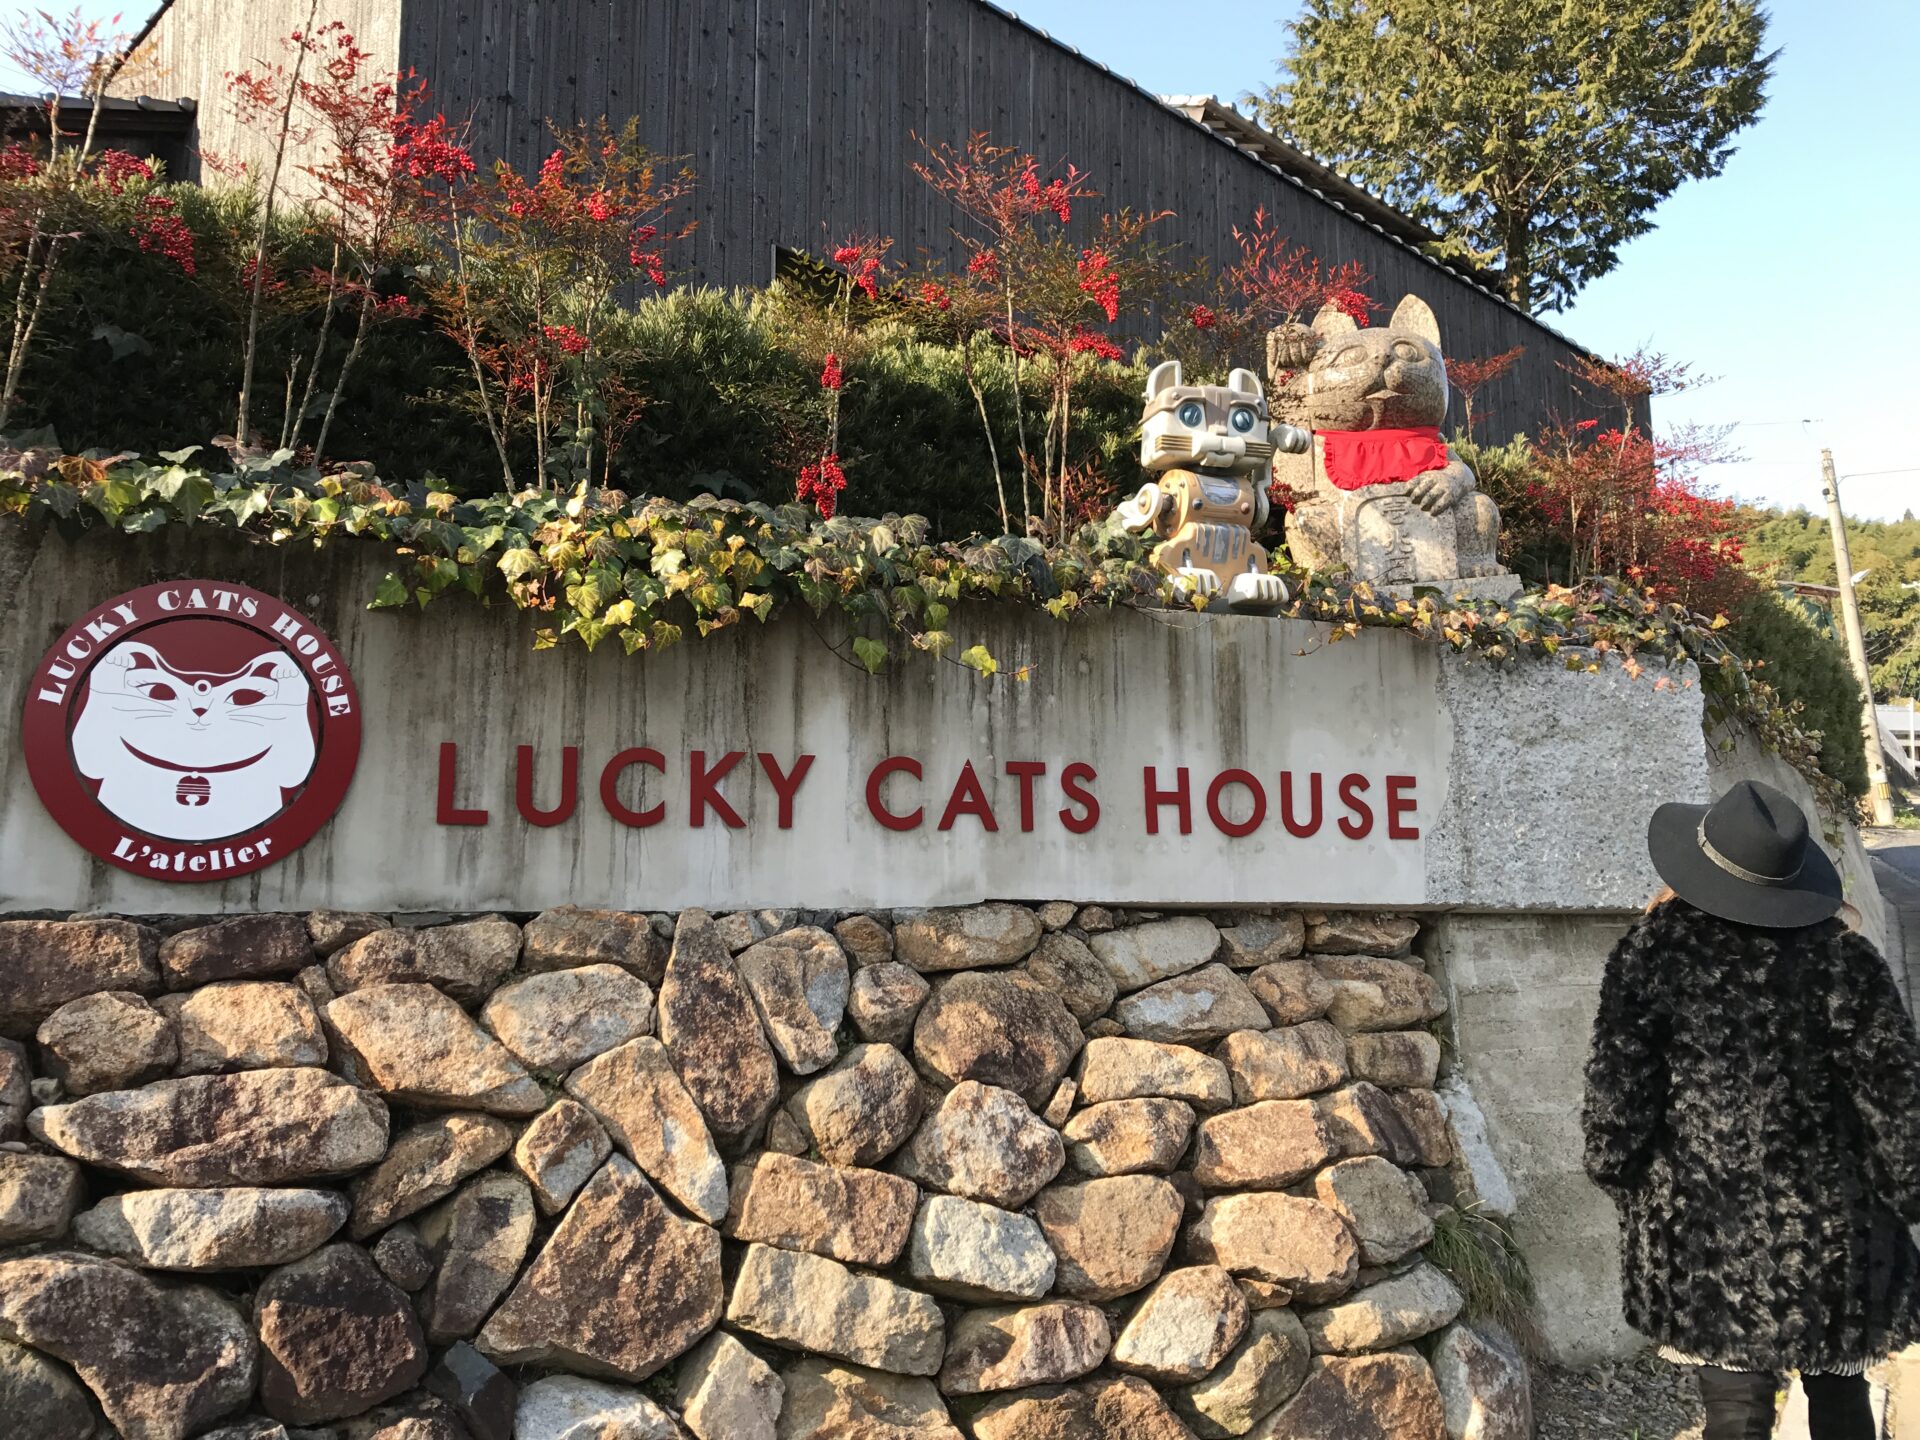 LUCKY CATS